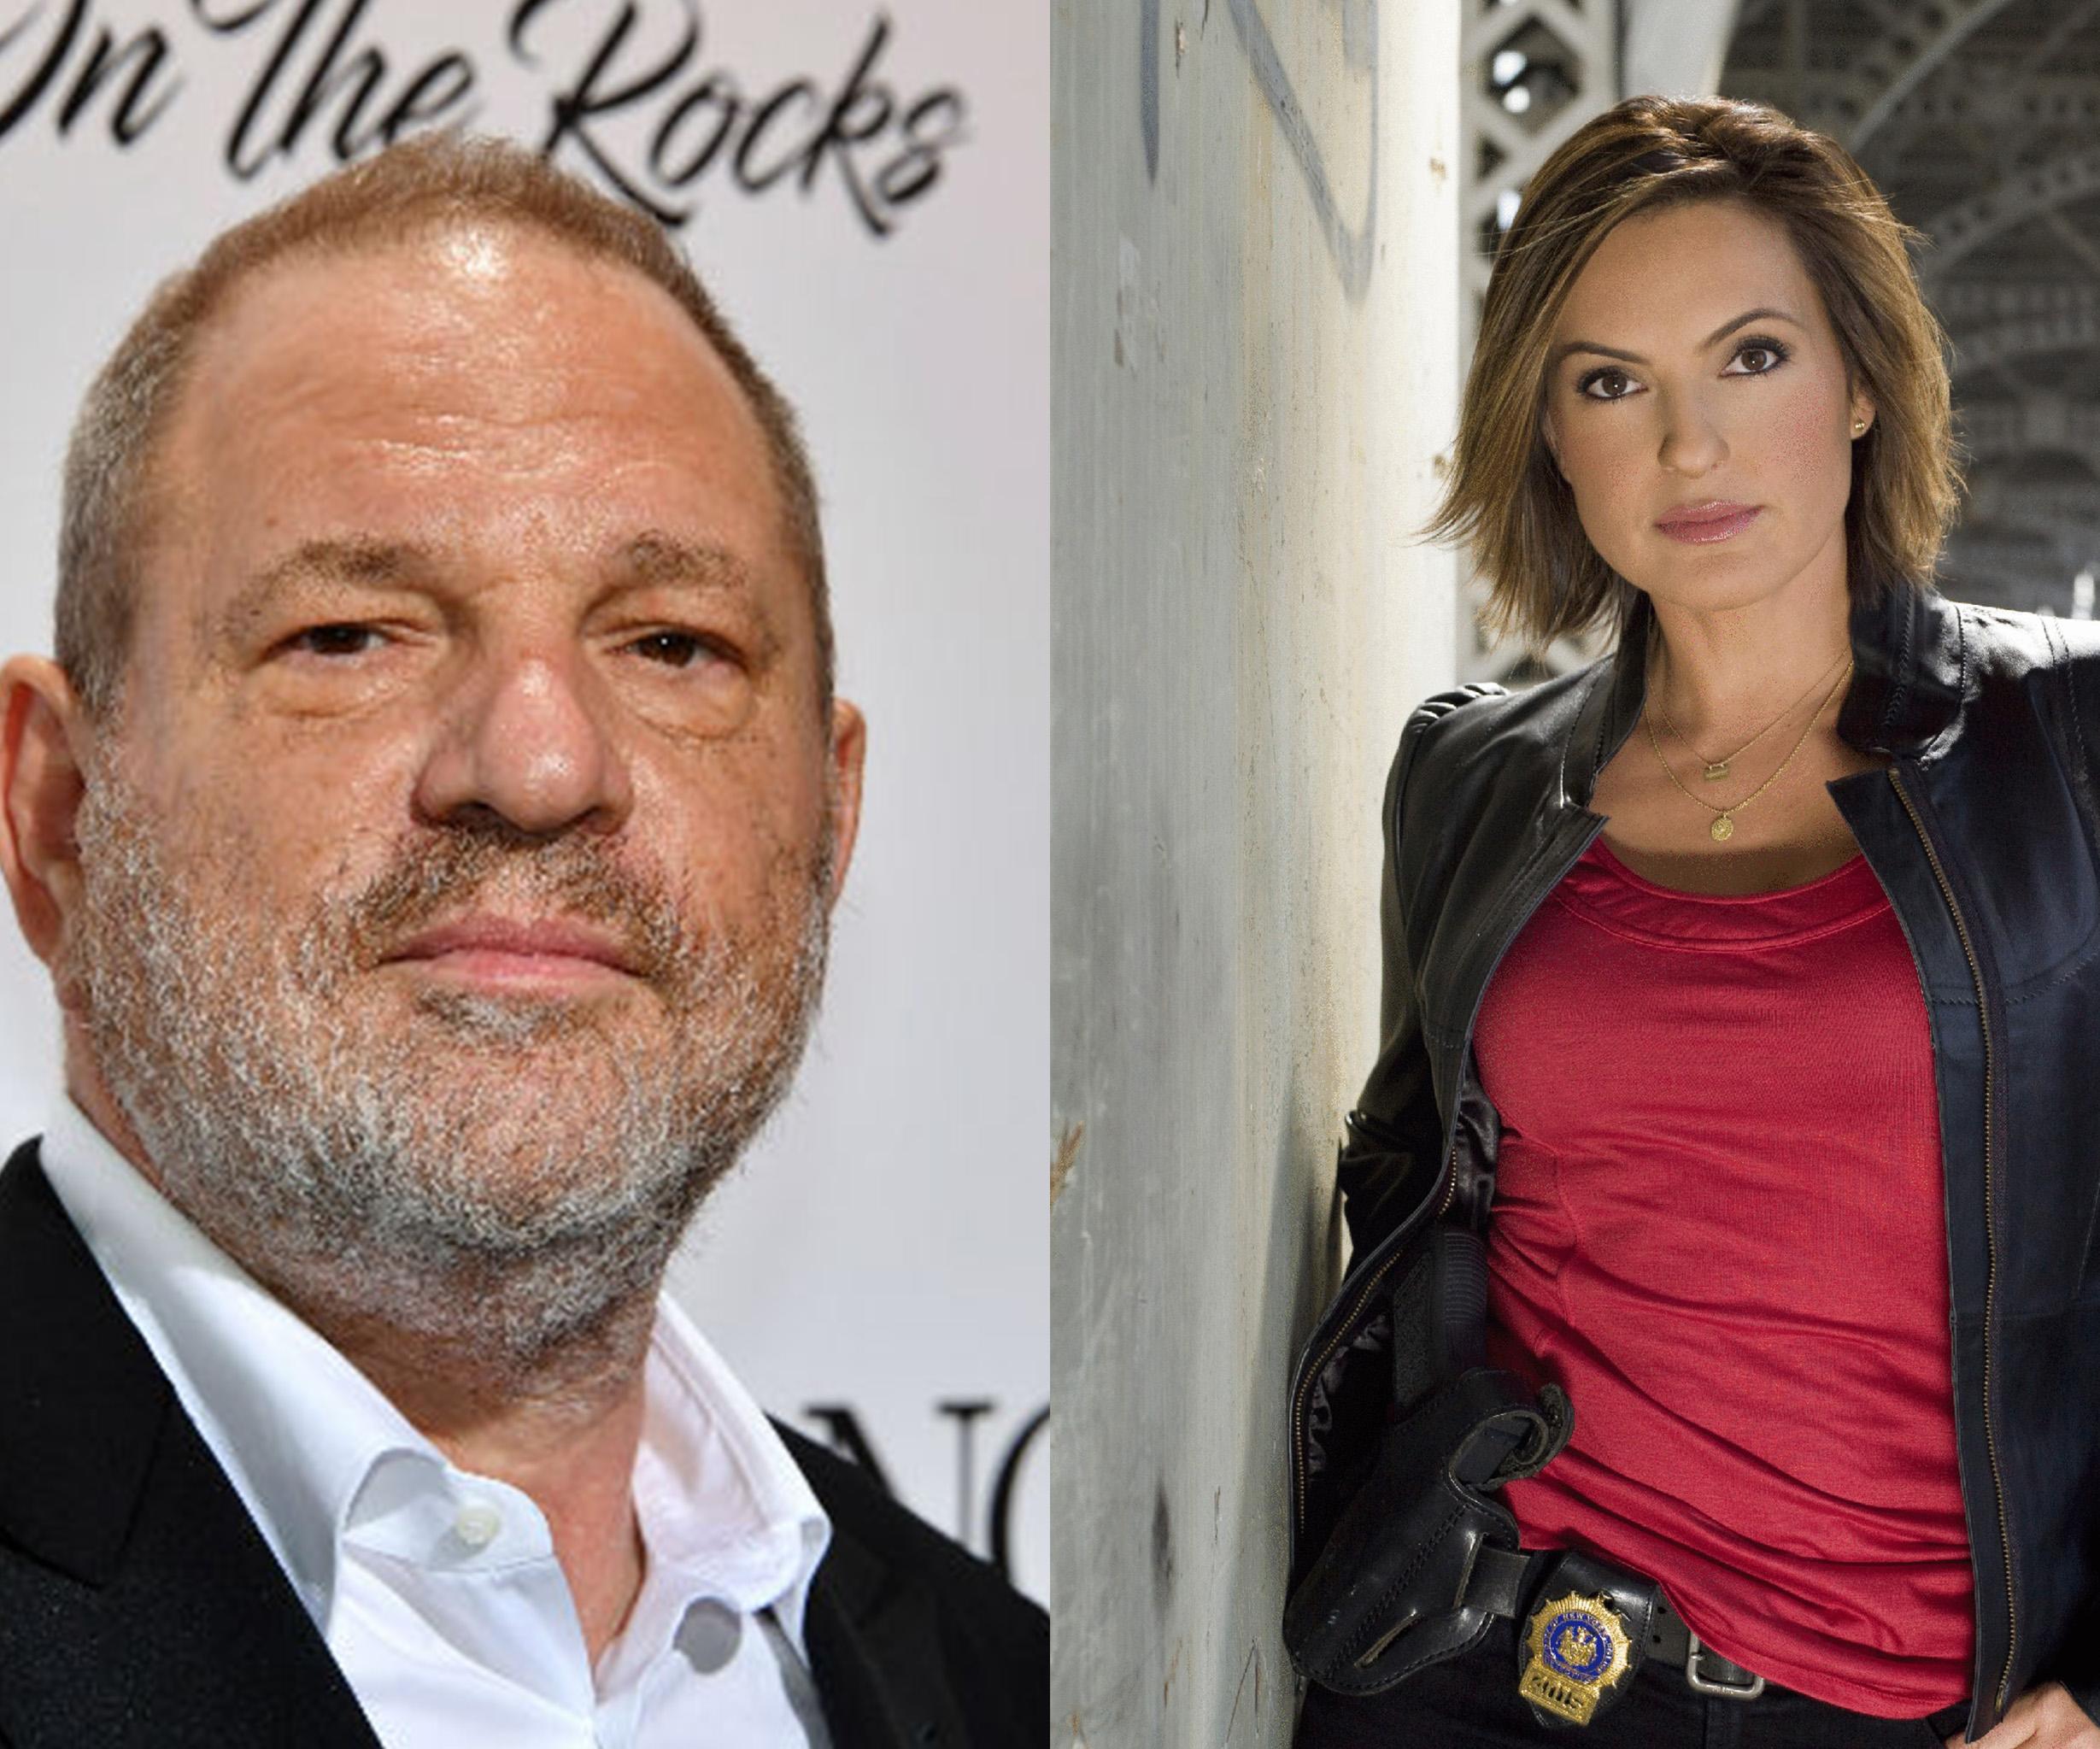 ‘Law & Order: SVU’ will tackle Harvey Weinstein scandal in upcoming episode